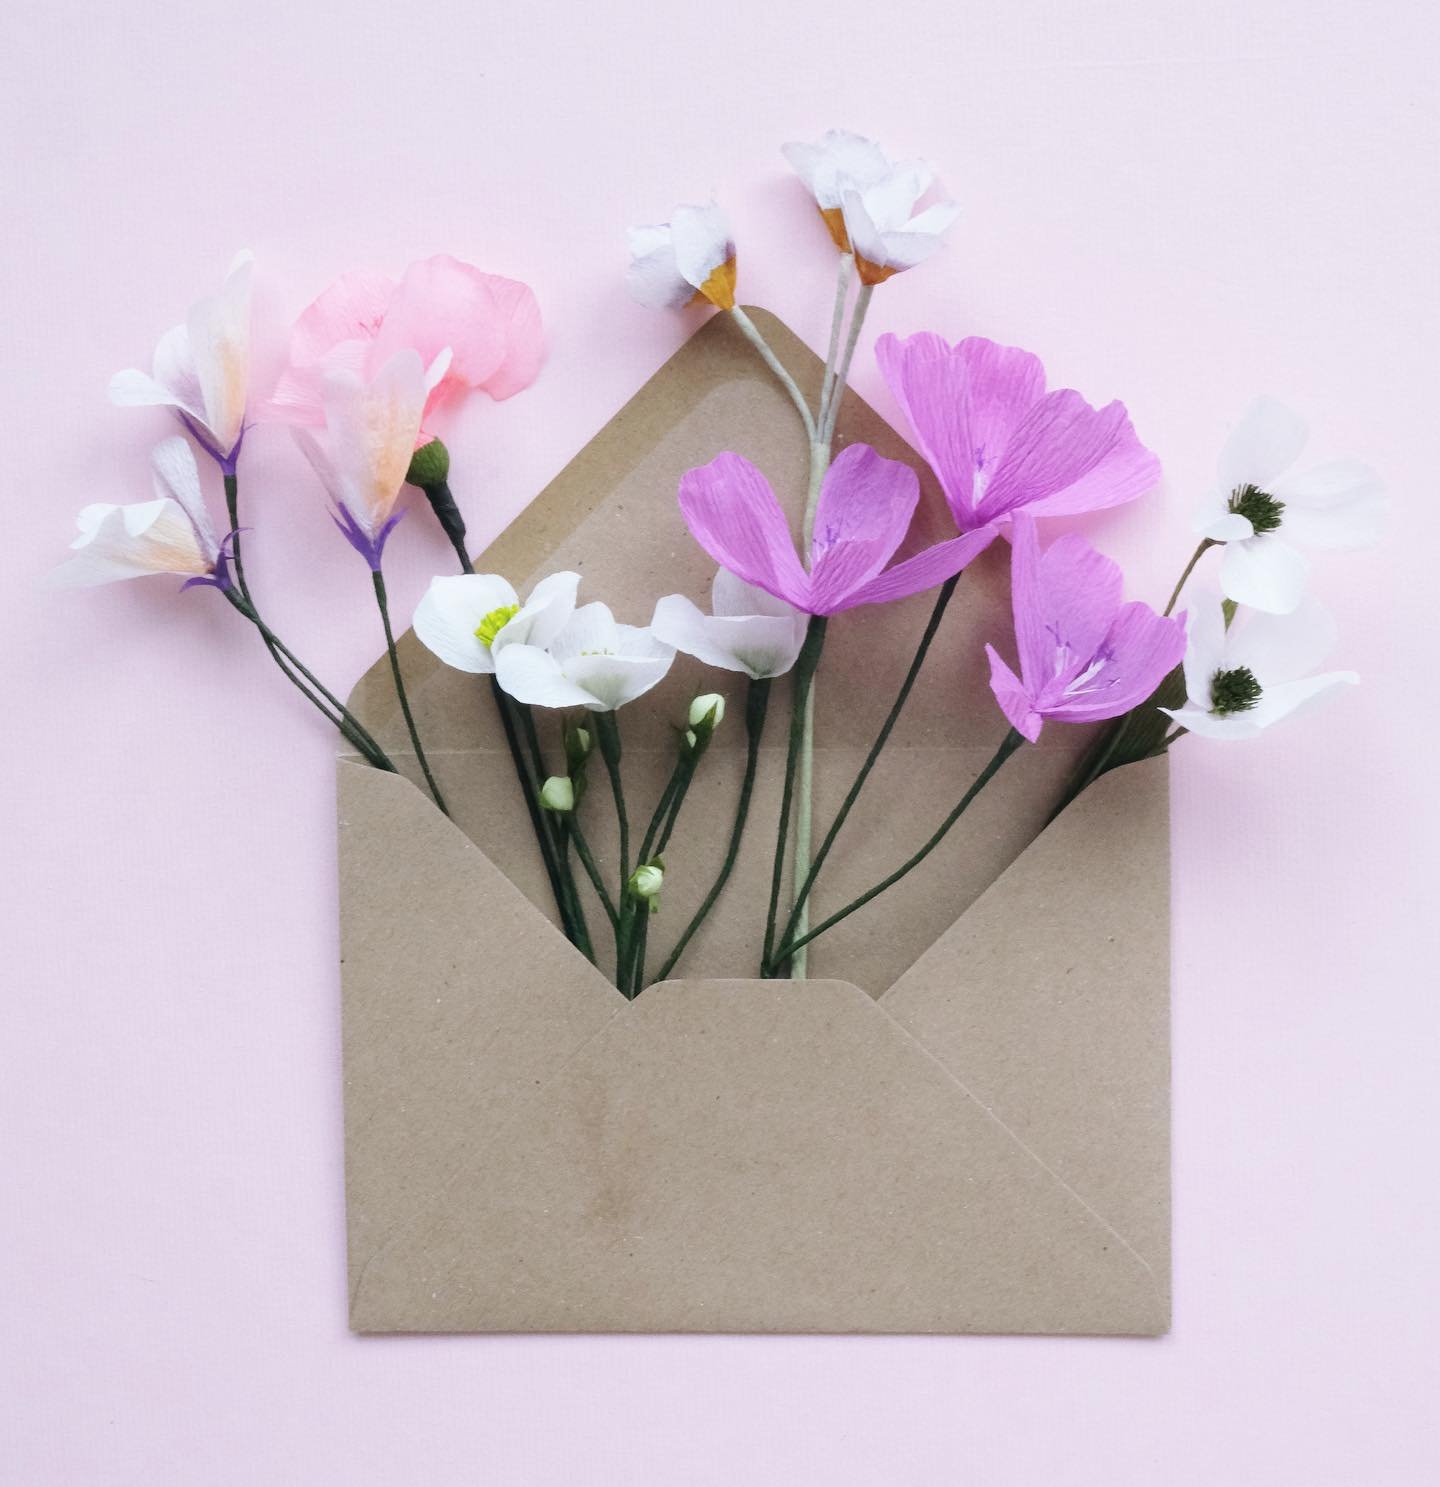 You can send an envelope full of wildflowers to someone special with our plantable Send &amp; Grow cards. 
We have designs for all kinds of celebrations &aacute;nd will be introducing 2 new styles in the upcoming weeks. 💫🌱
&bull;&bull;&bull;&bull;&